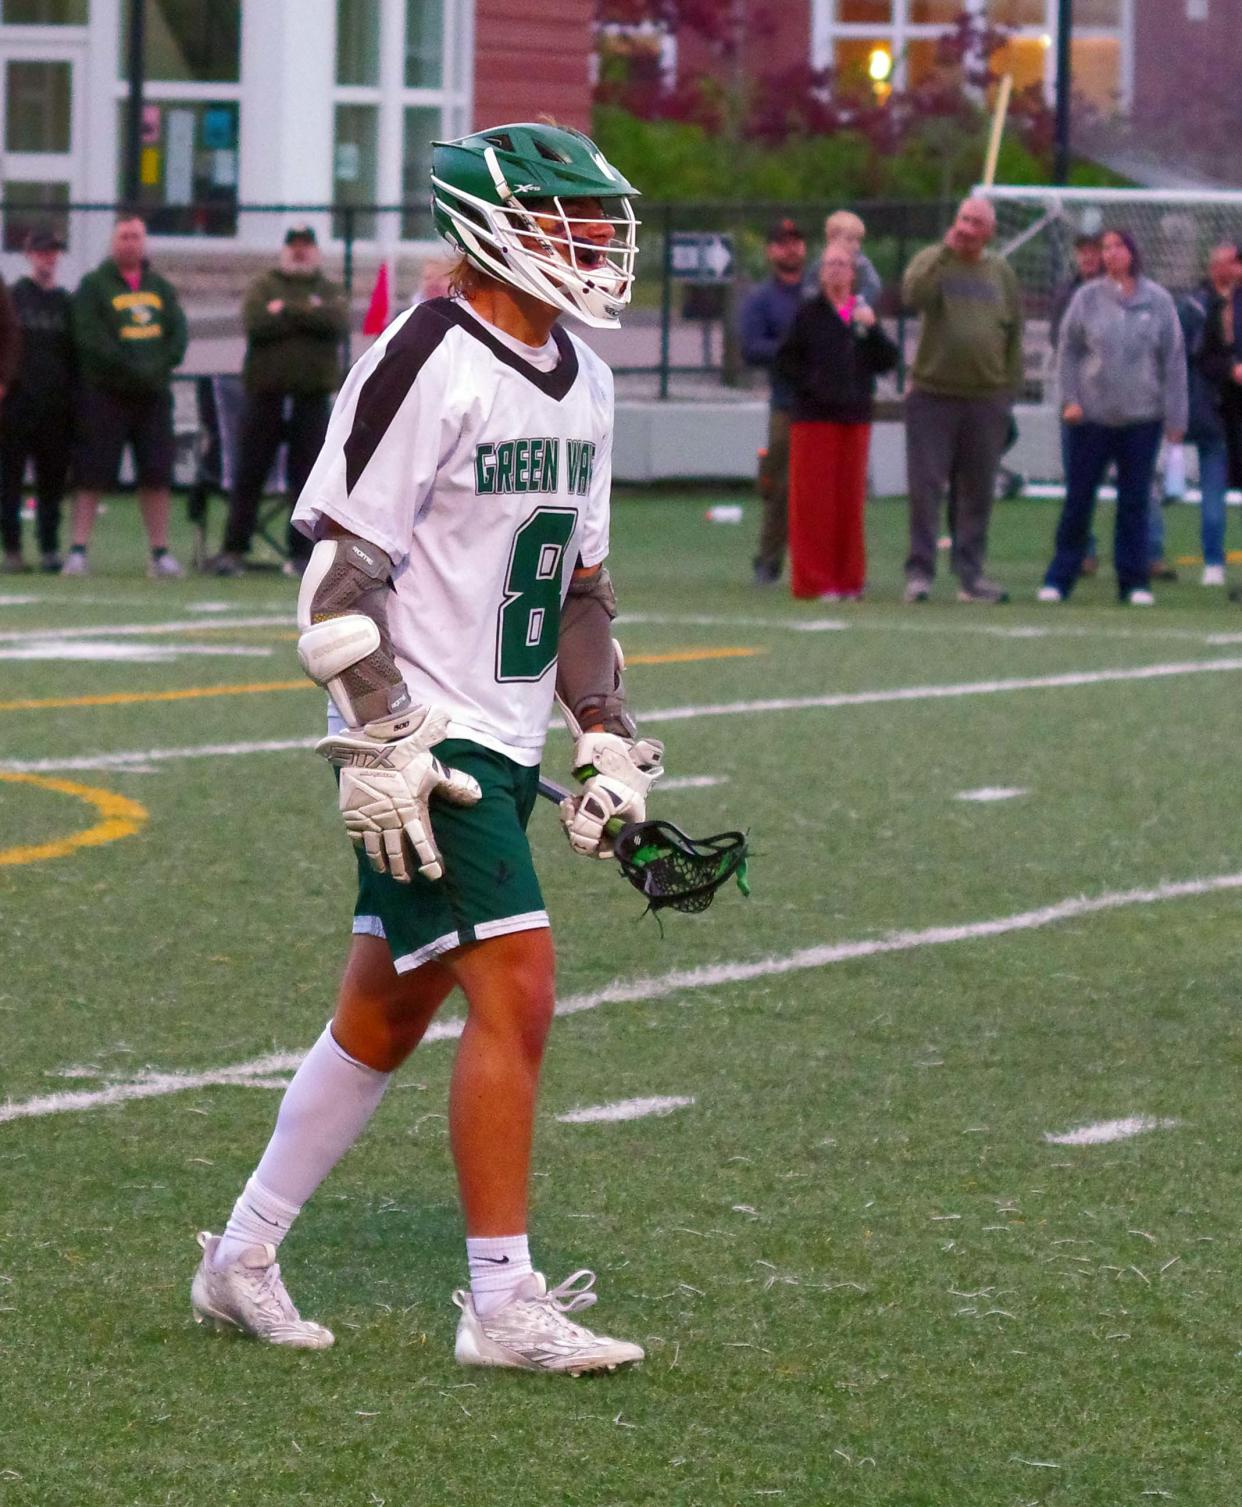 Hunter Grafton of Abington walks toward his teammates after scoring another goal in another multi goal game for the Green wave, who took a 17-4 victory over South Shore Tech to advance, on Monday, June 5, 2023.